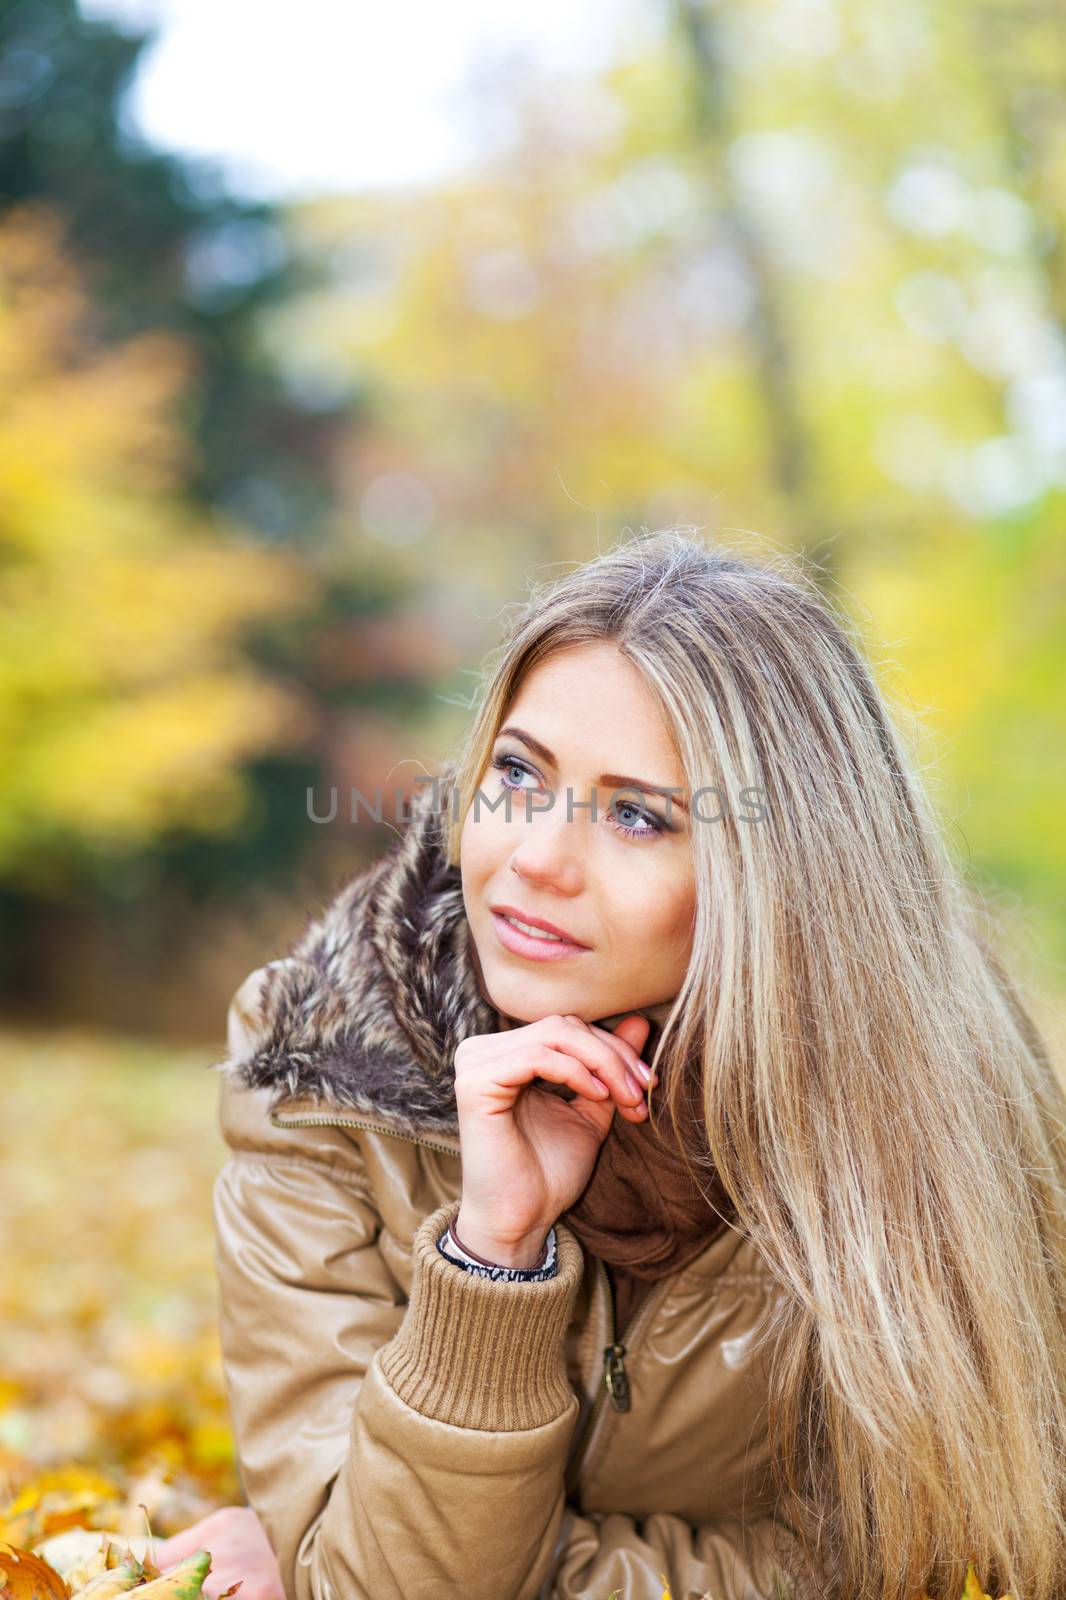 Young cute woman lying in a park in autumn season